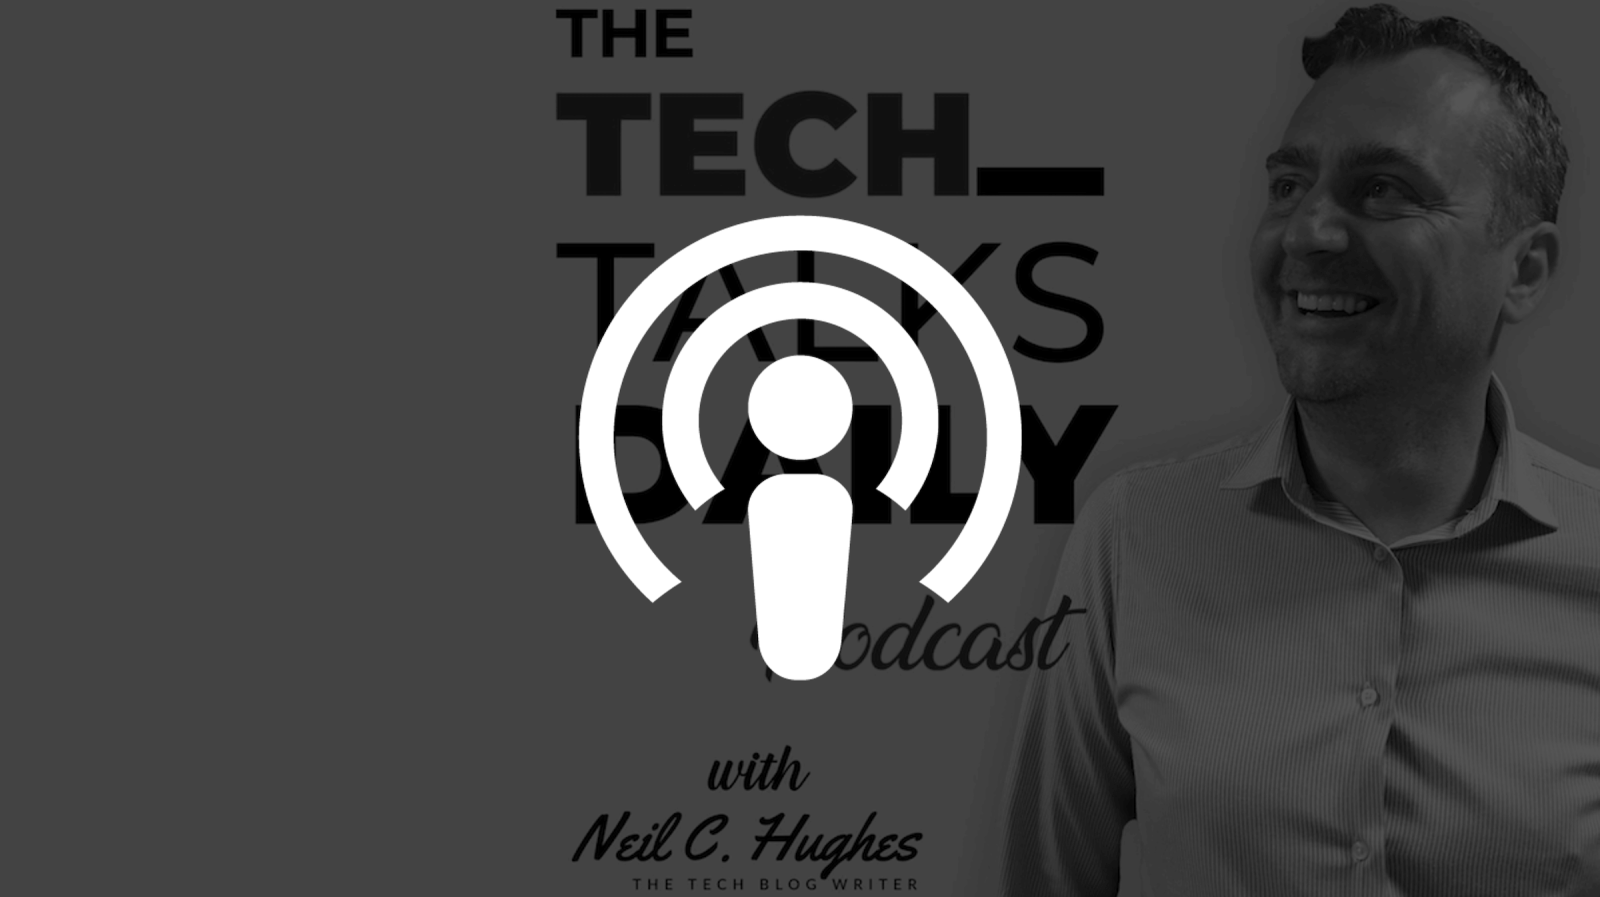 The Tech Talks Podcast Cover Image